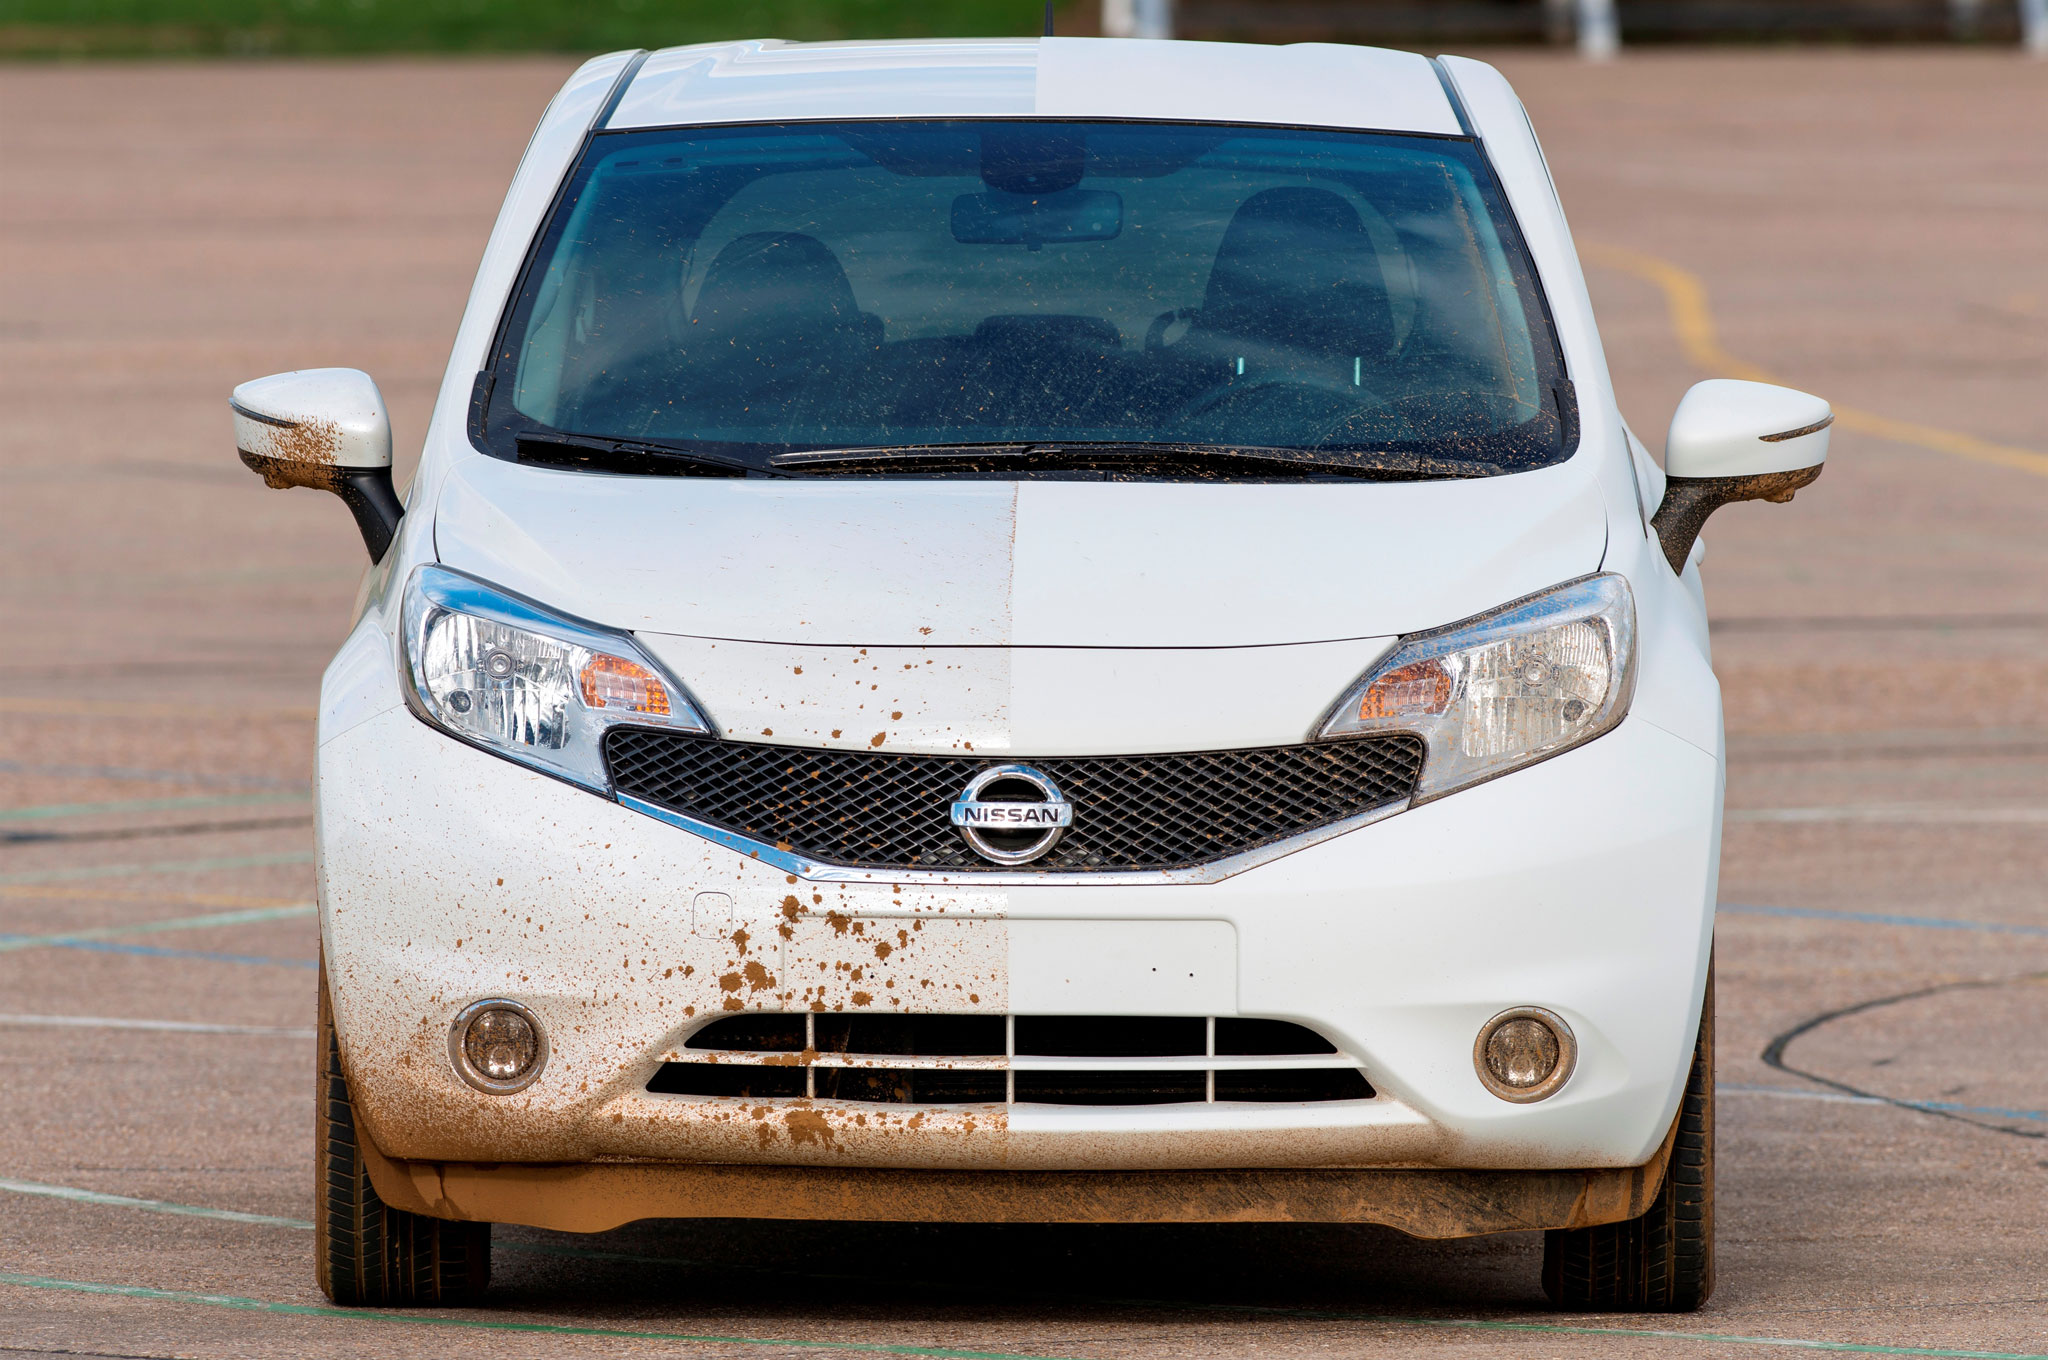 Nissan Develops First Ever Self-Cleaning Car Prototype, Calls it Nissan Note